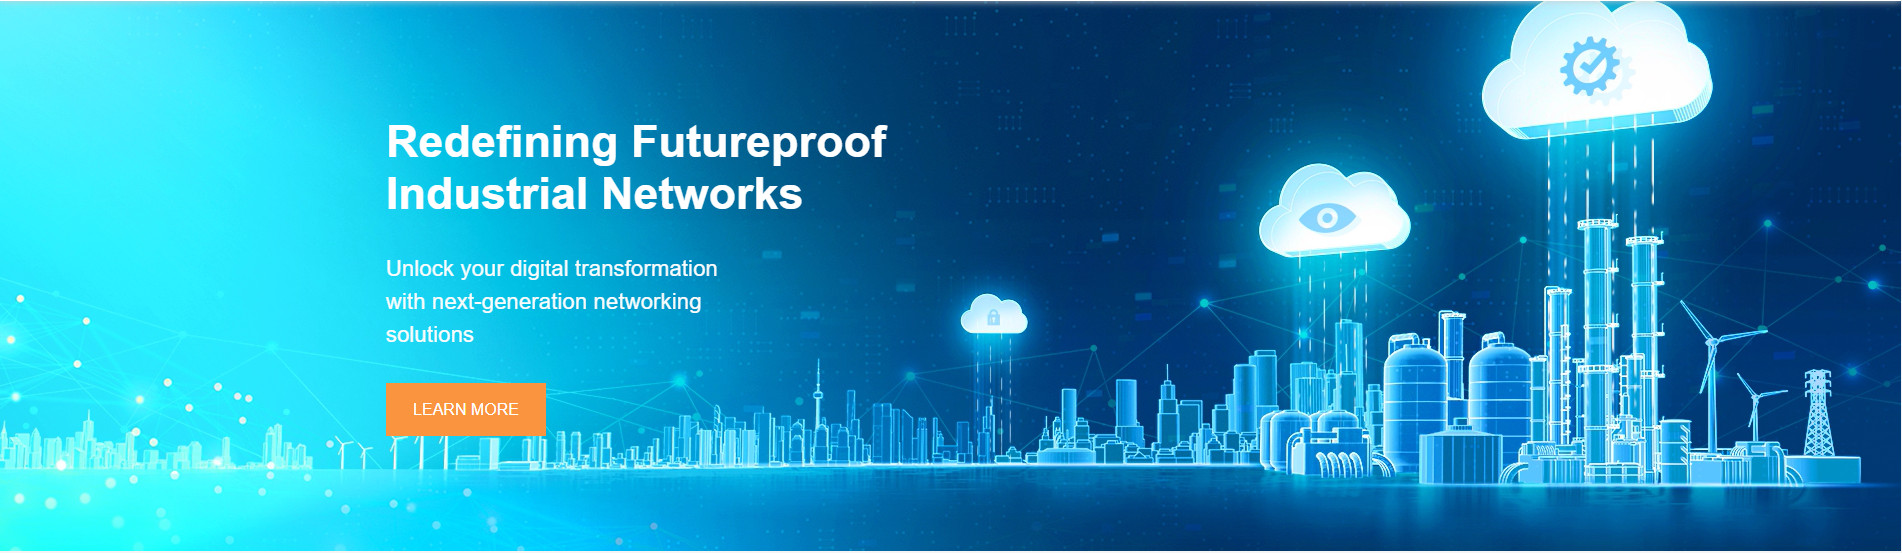 redefining futureproof industrial networks